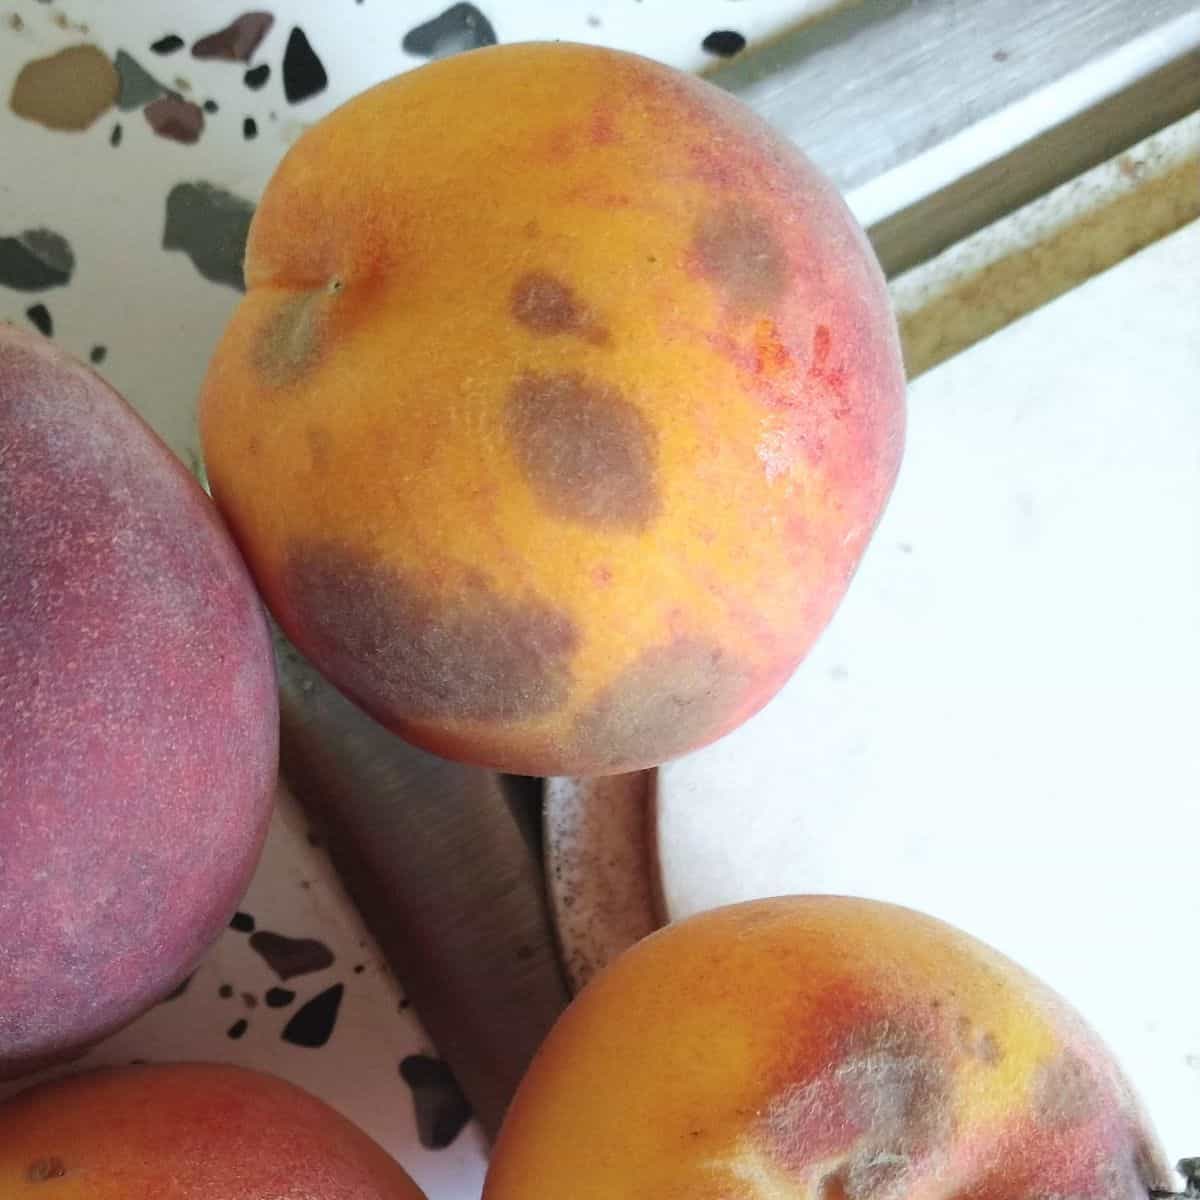 Brown spots are shown forming on the outside of some peaches.